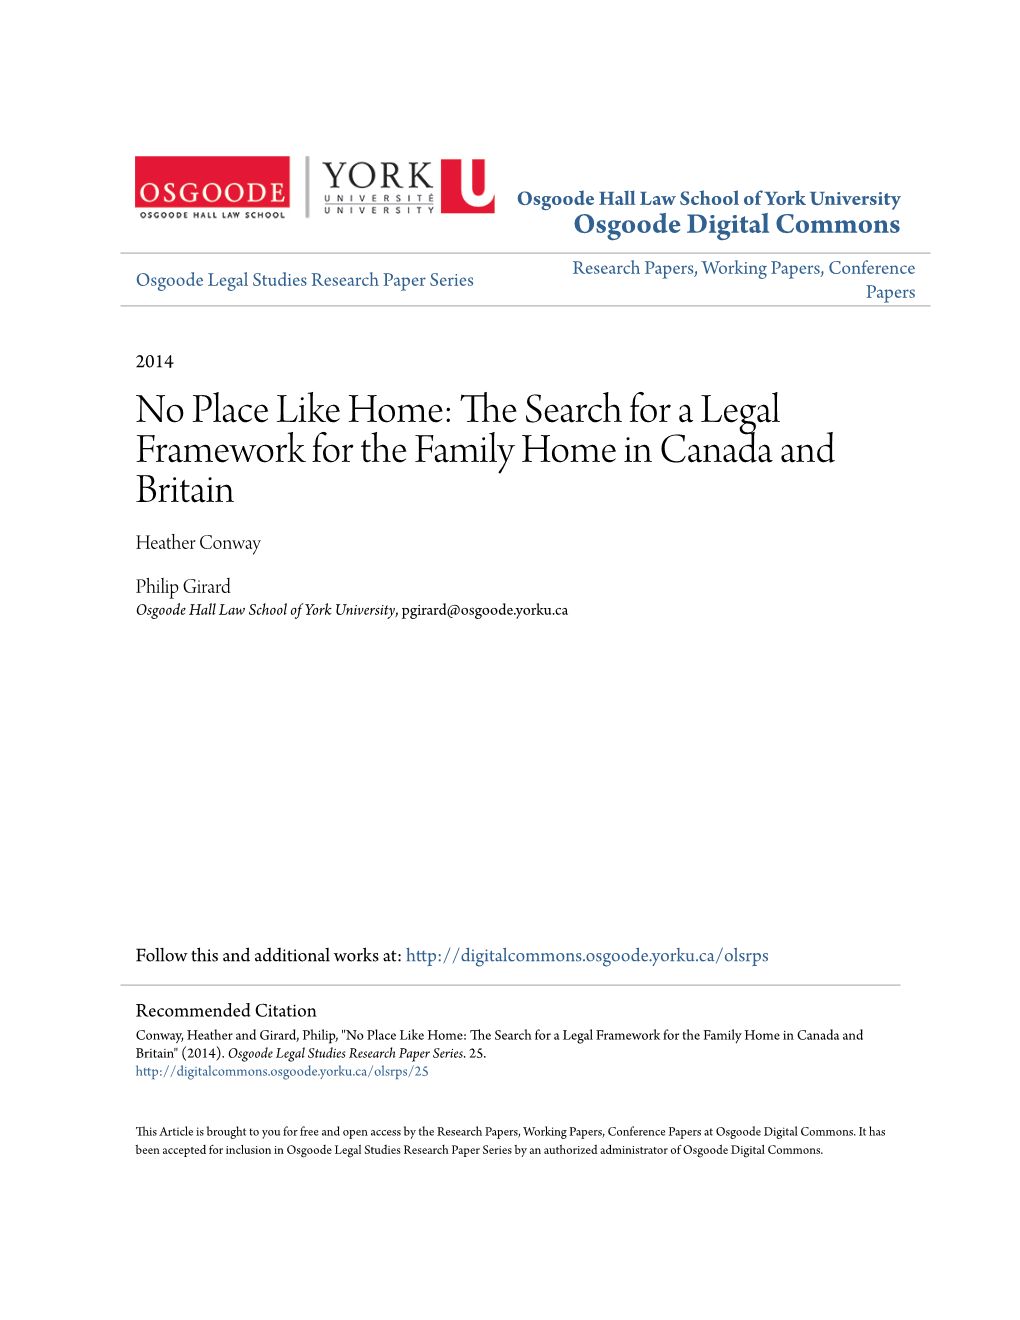 The Search for a Legal Framework for the Family Home in Canada and Britain Conway, H